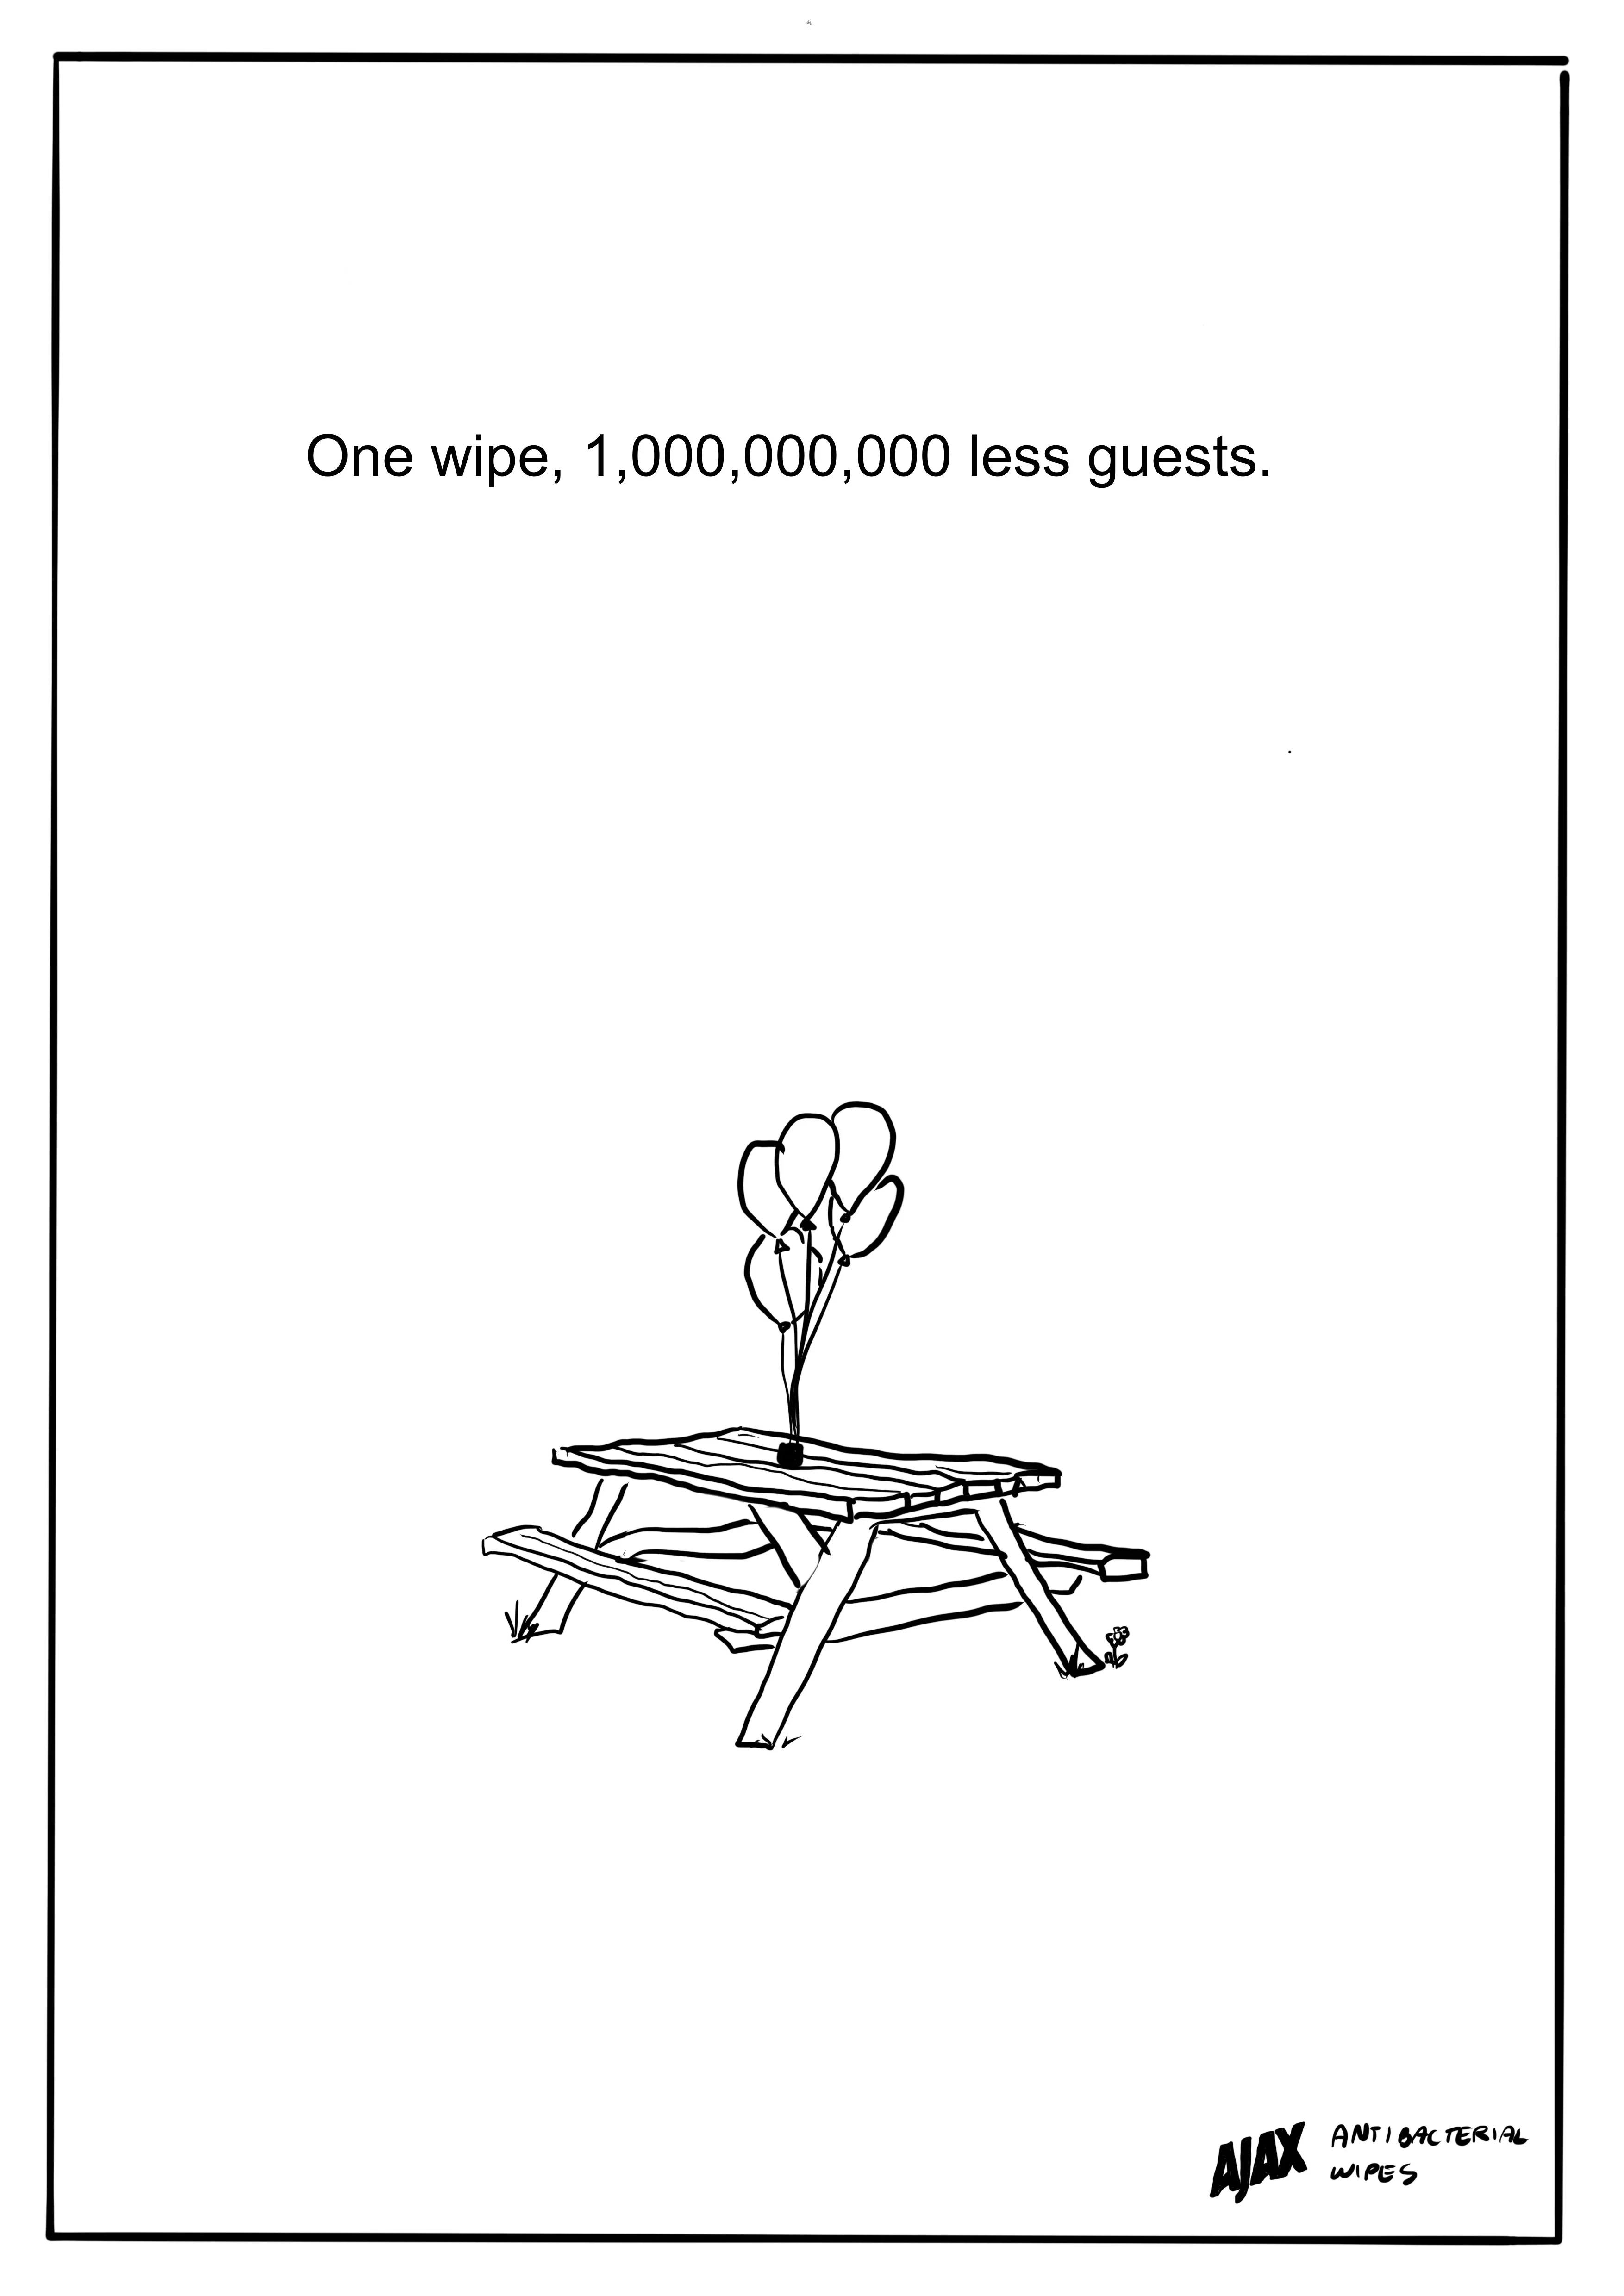 an empty park bench with balloons, the caption reads 'one wipe 1,000,000,000 less guests', AJAX wipes